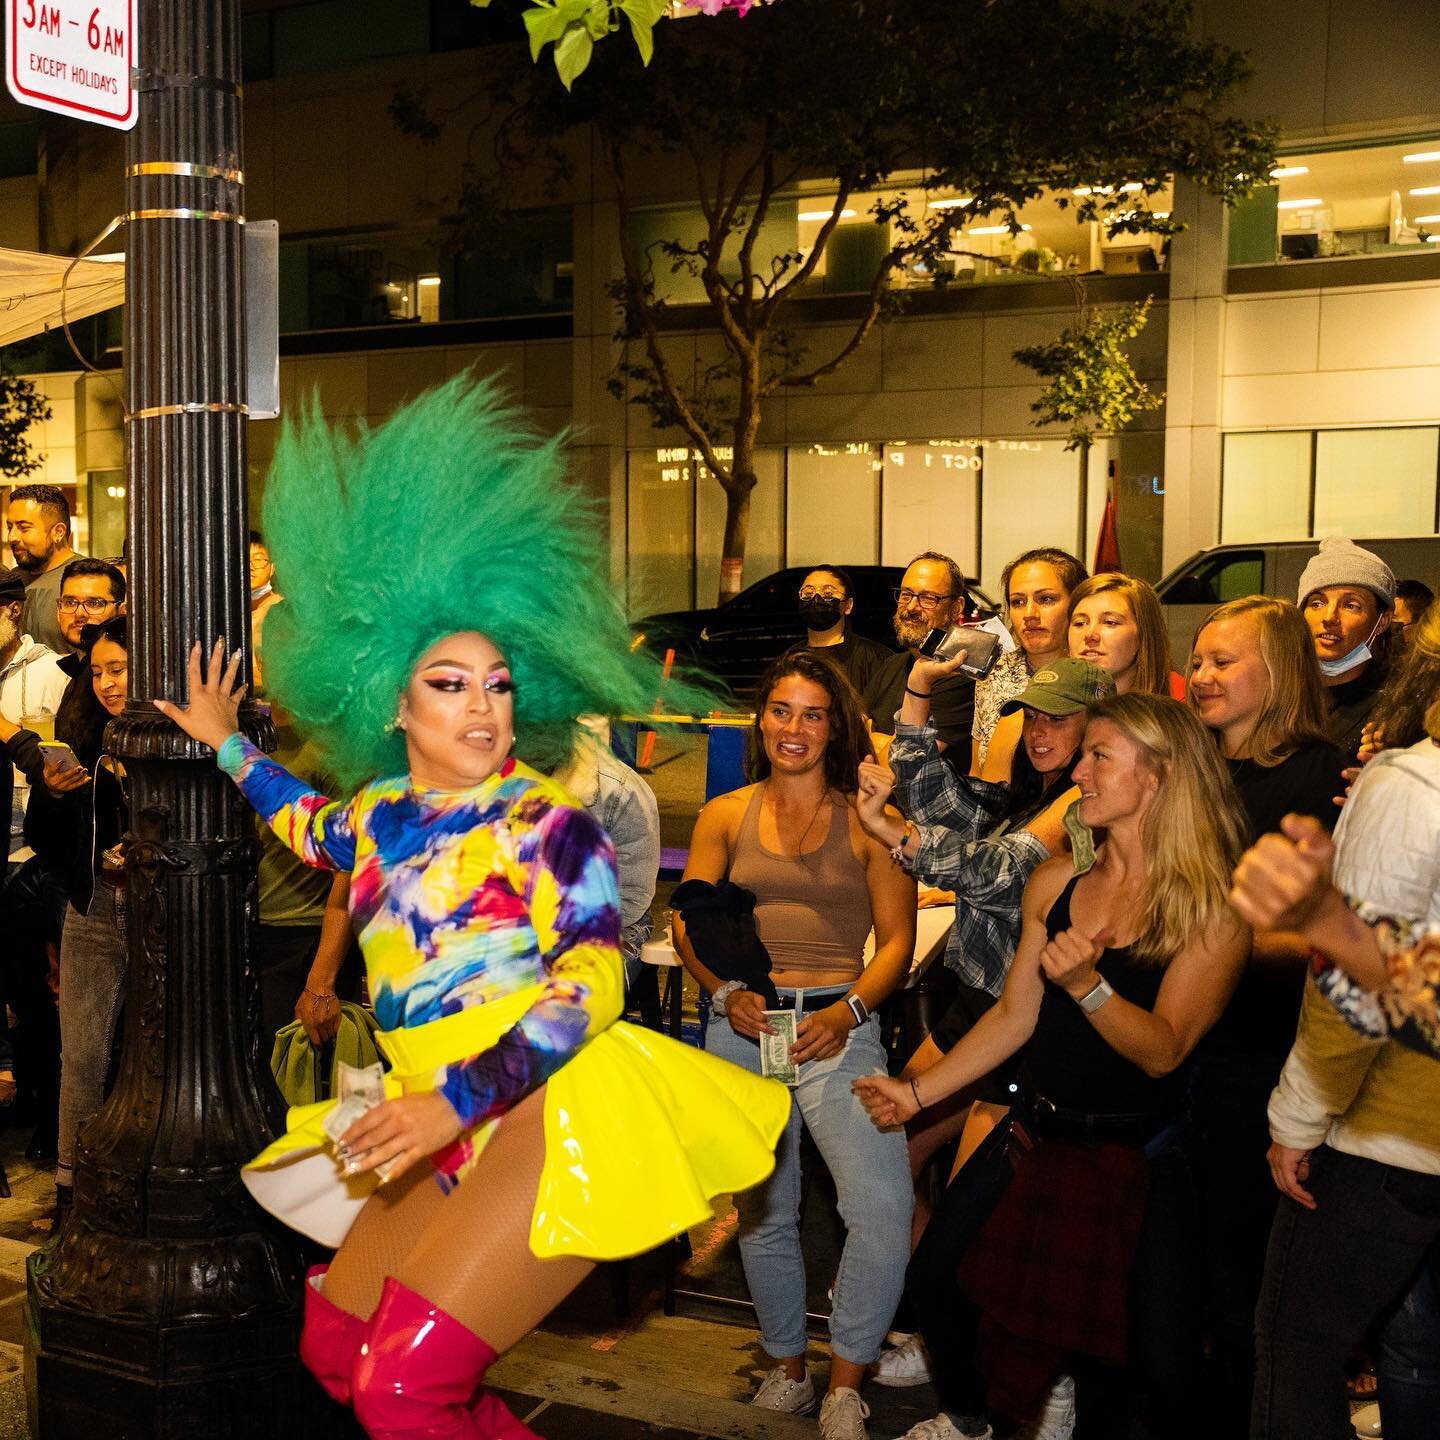 Looking back at how we fill the streets with joy at Pride at The Port Bar 2021. See you this weekend!

#gays #instagay #gay #gaysofinstagram #queeroakland #reopening #viewingparty #gayinsta #toastto #gaynightlife #gaynightout #dragrace #oaklandloveit